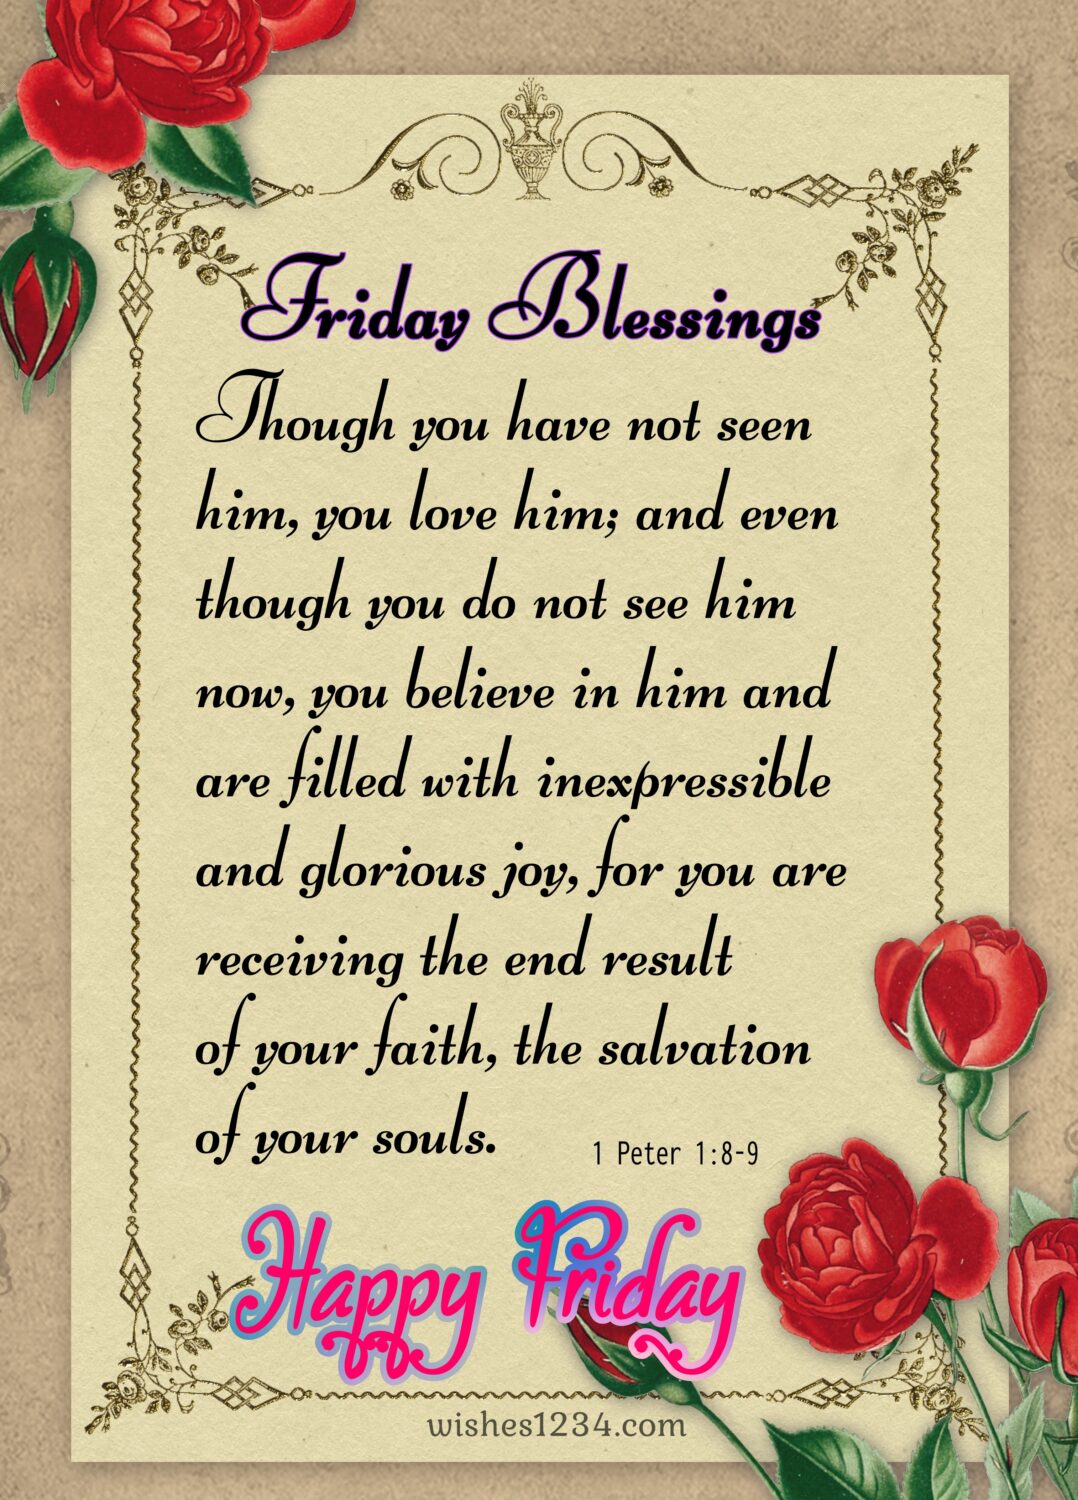 Vintage paper background with red roses design, Quotes about Friday | Friday blessings.